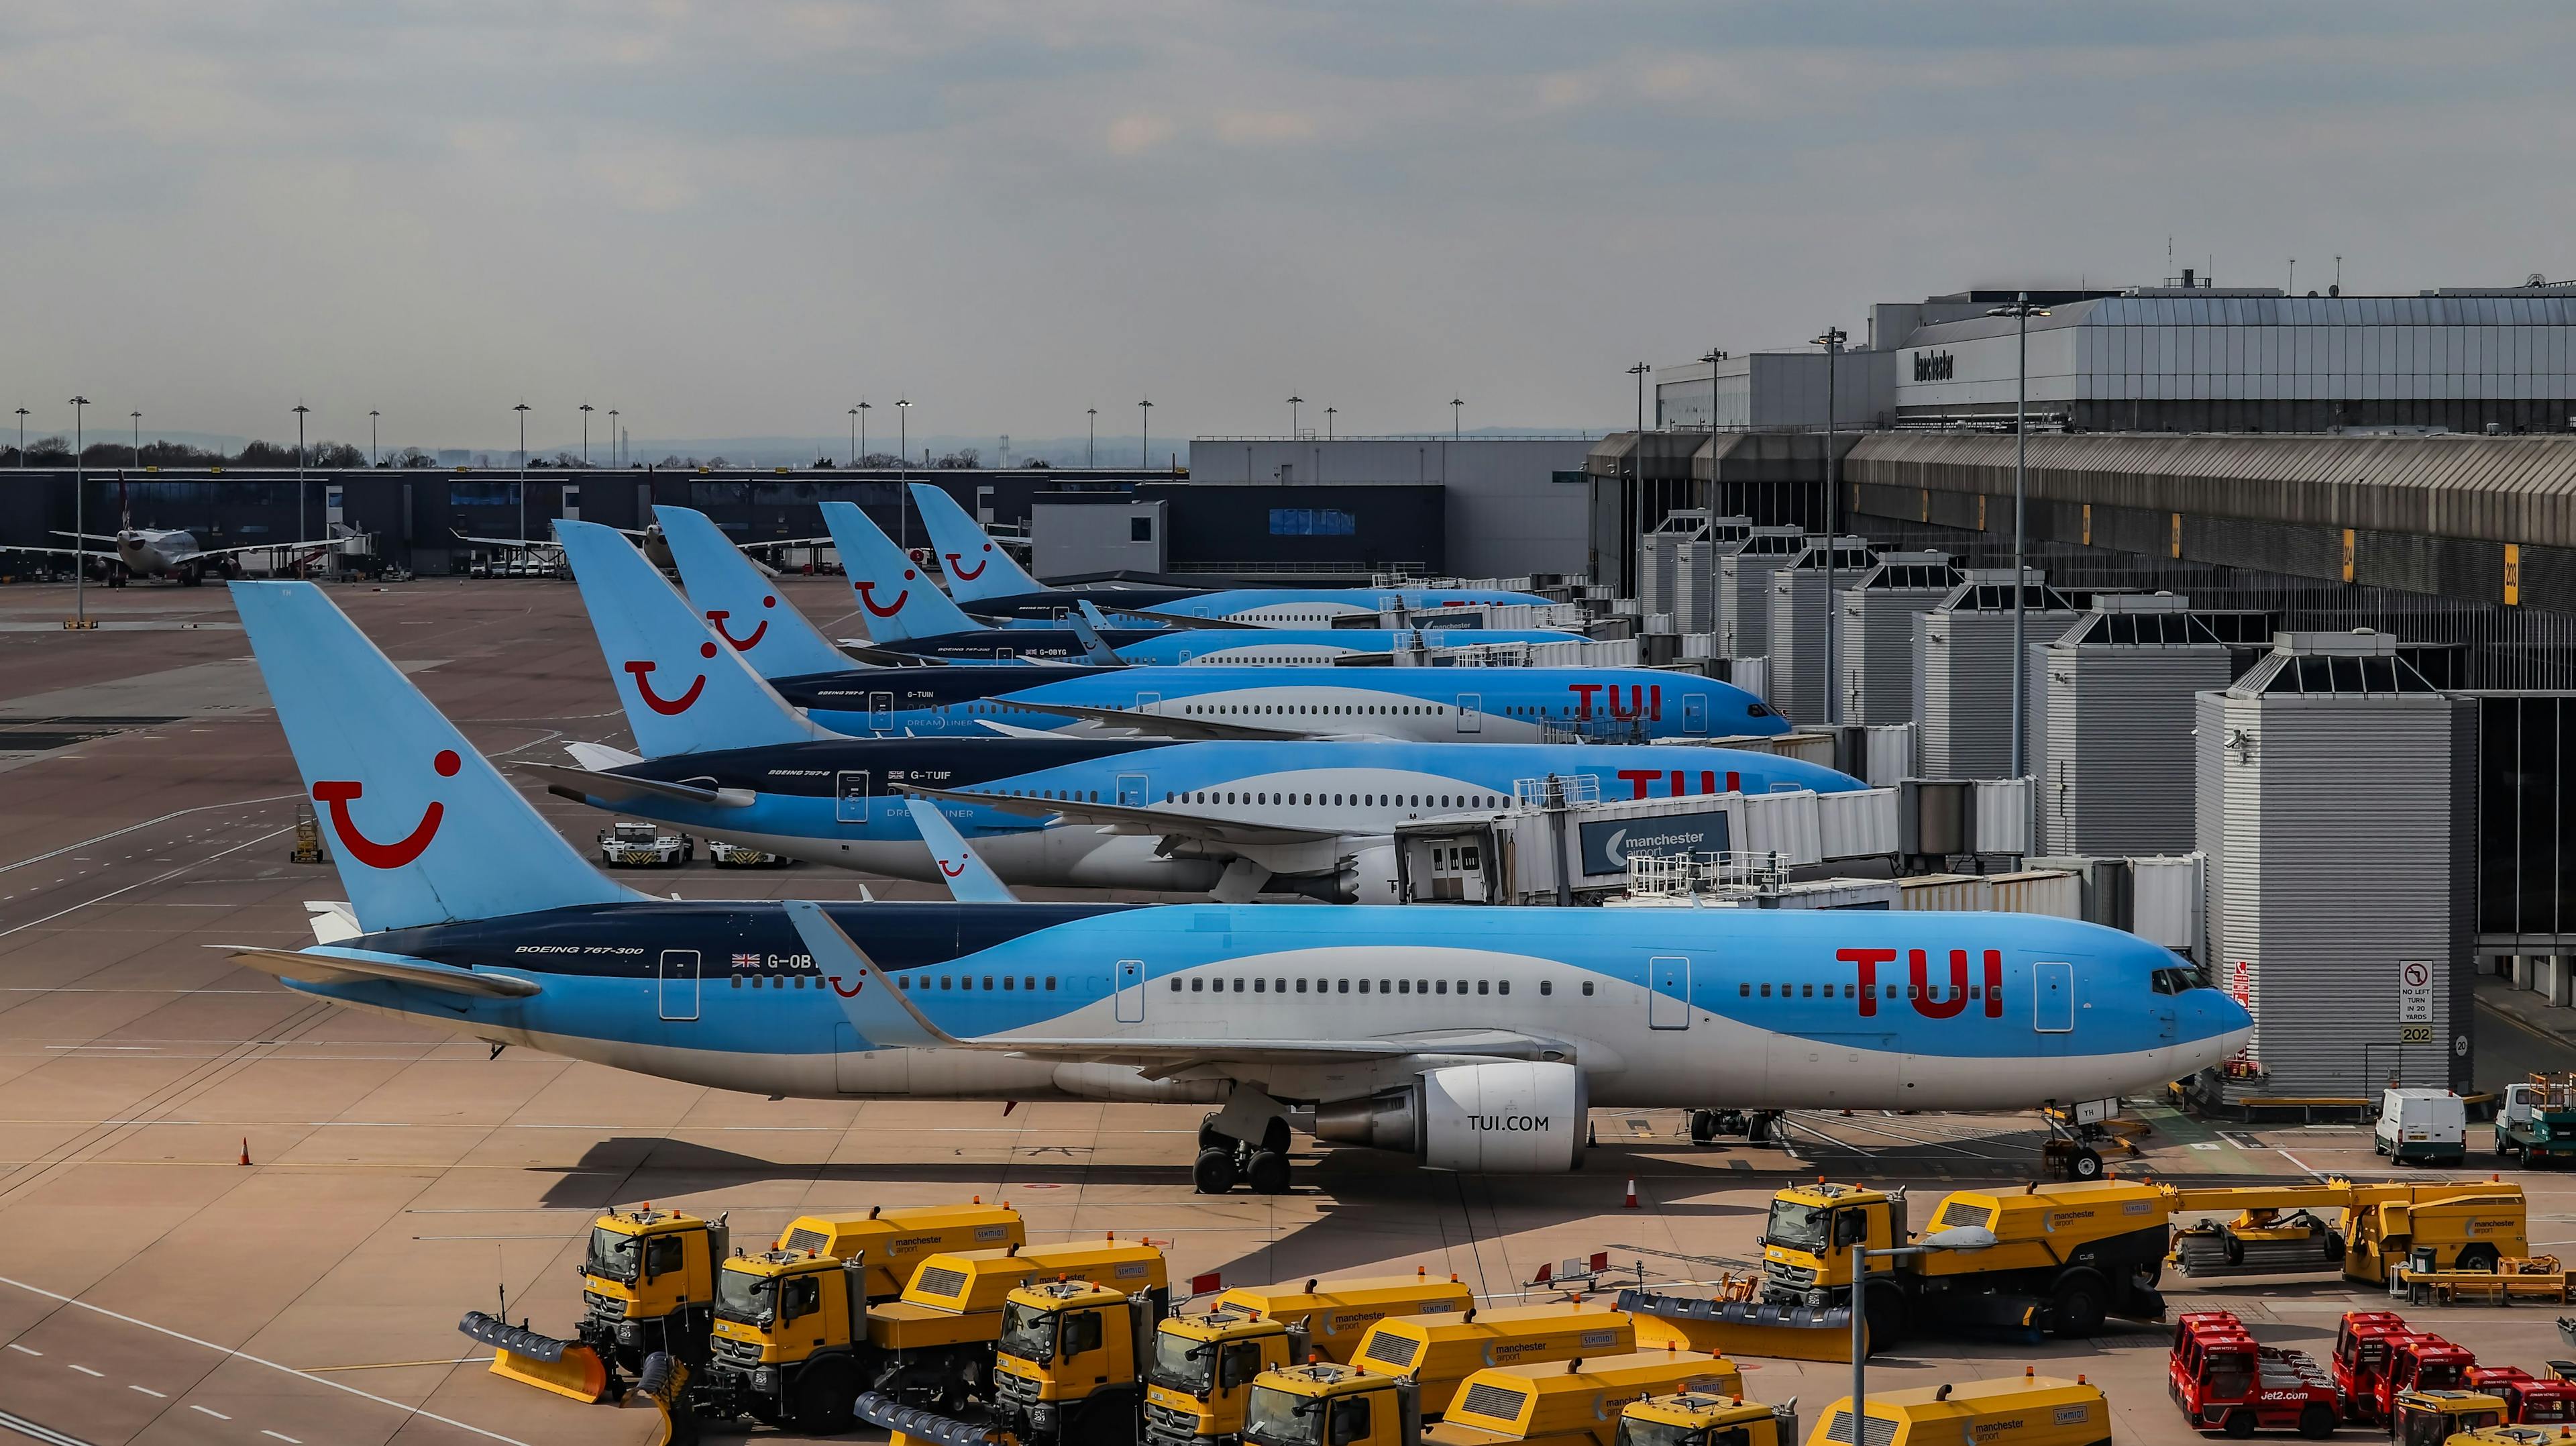 Europe’s Budget-Friendly Airlines You Need to Know - TUI - UK Europe - low-budget airlines - ratepunk